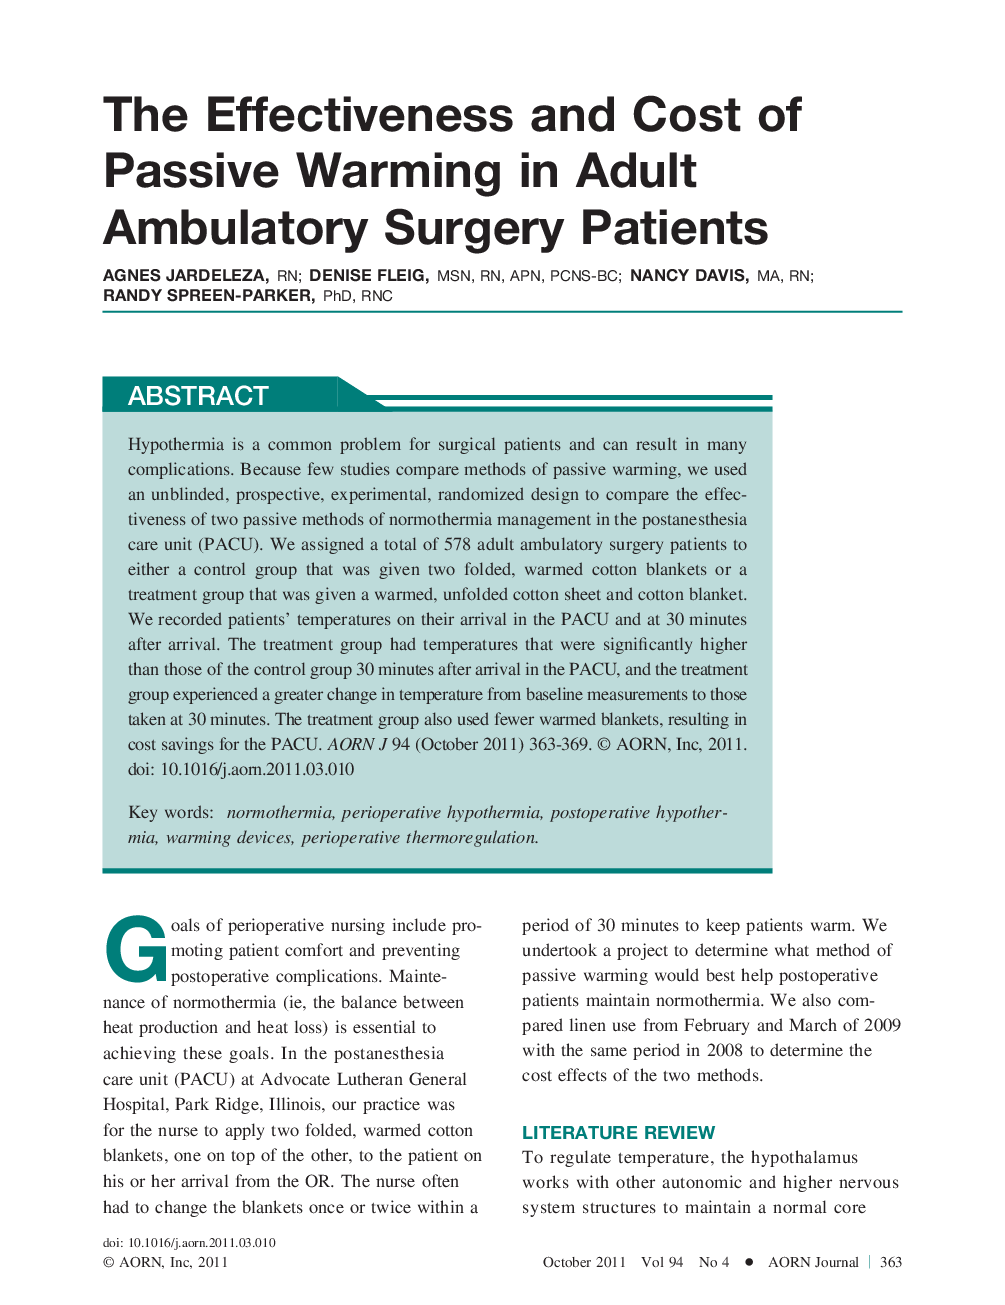 The Effectiveness and Cost of Passive Warming in Adult Ambulatory Surgery Patients